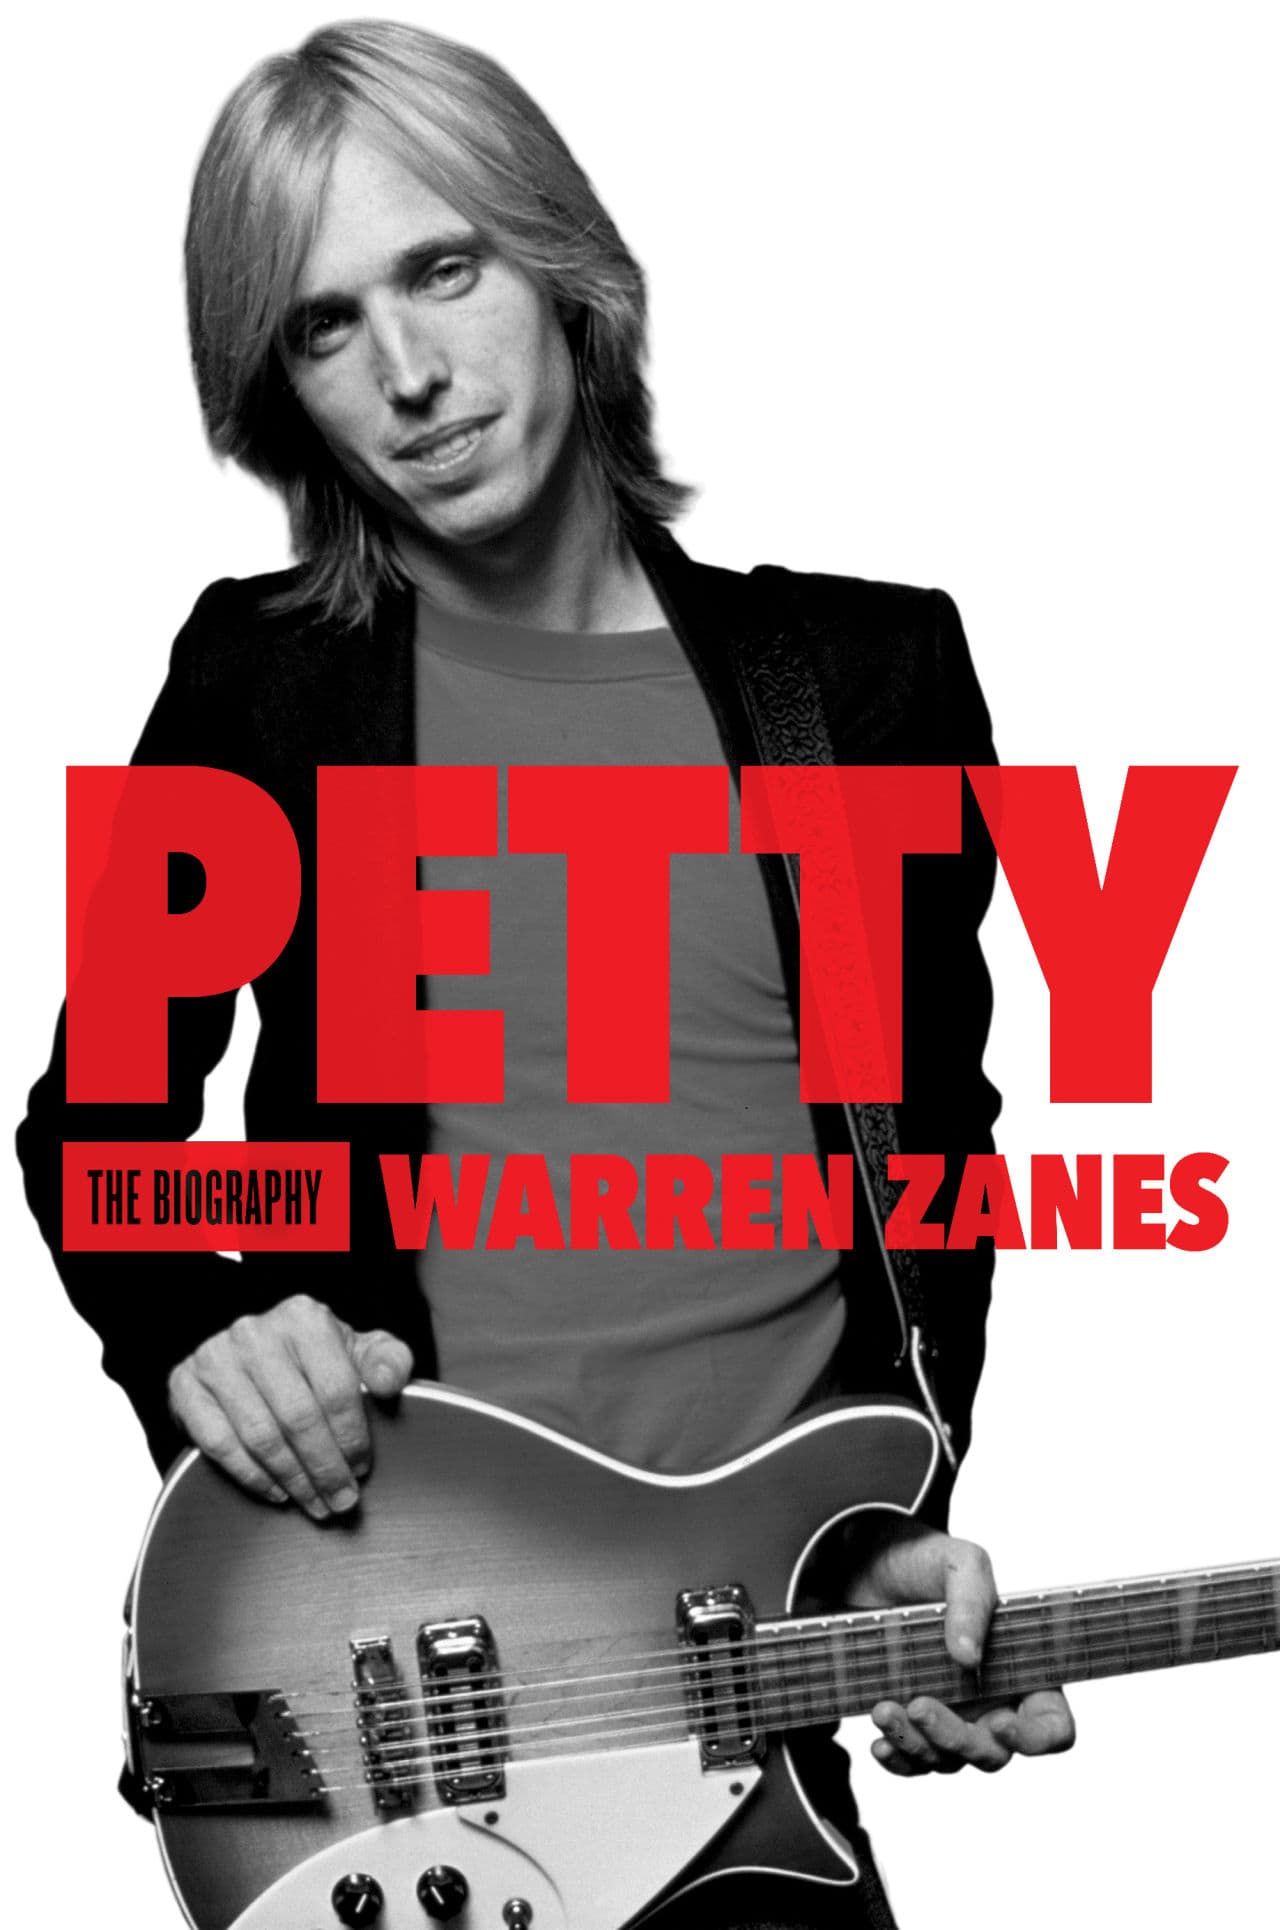 Cover art for Warren Zane's biography of Tom Petty. (Courtesy Henry Holt and Company)